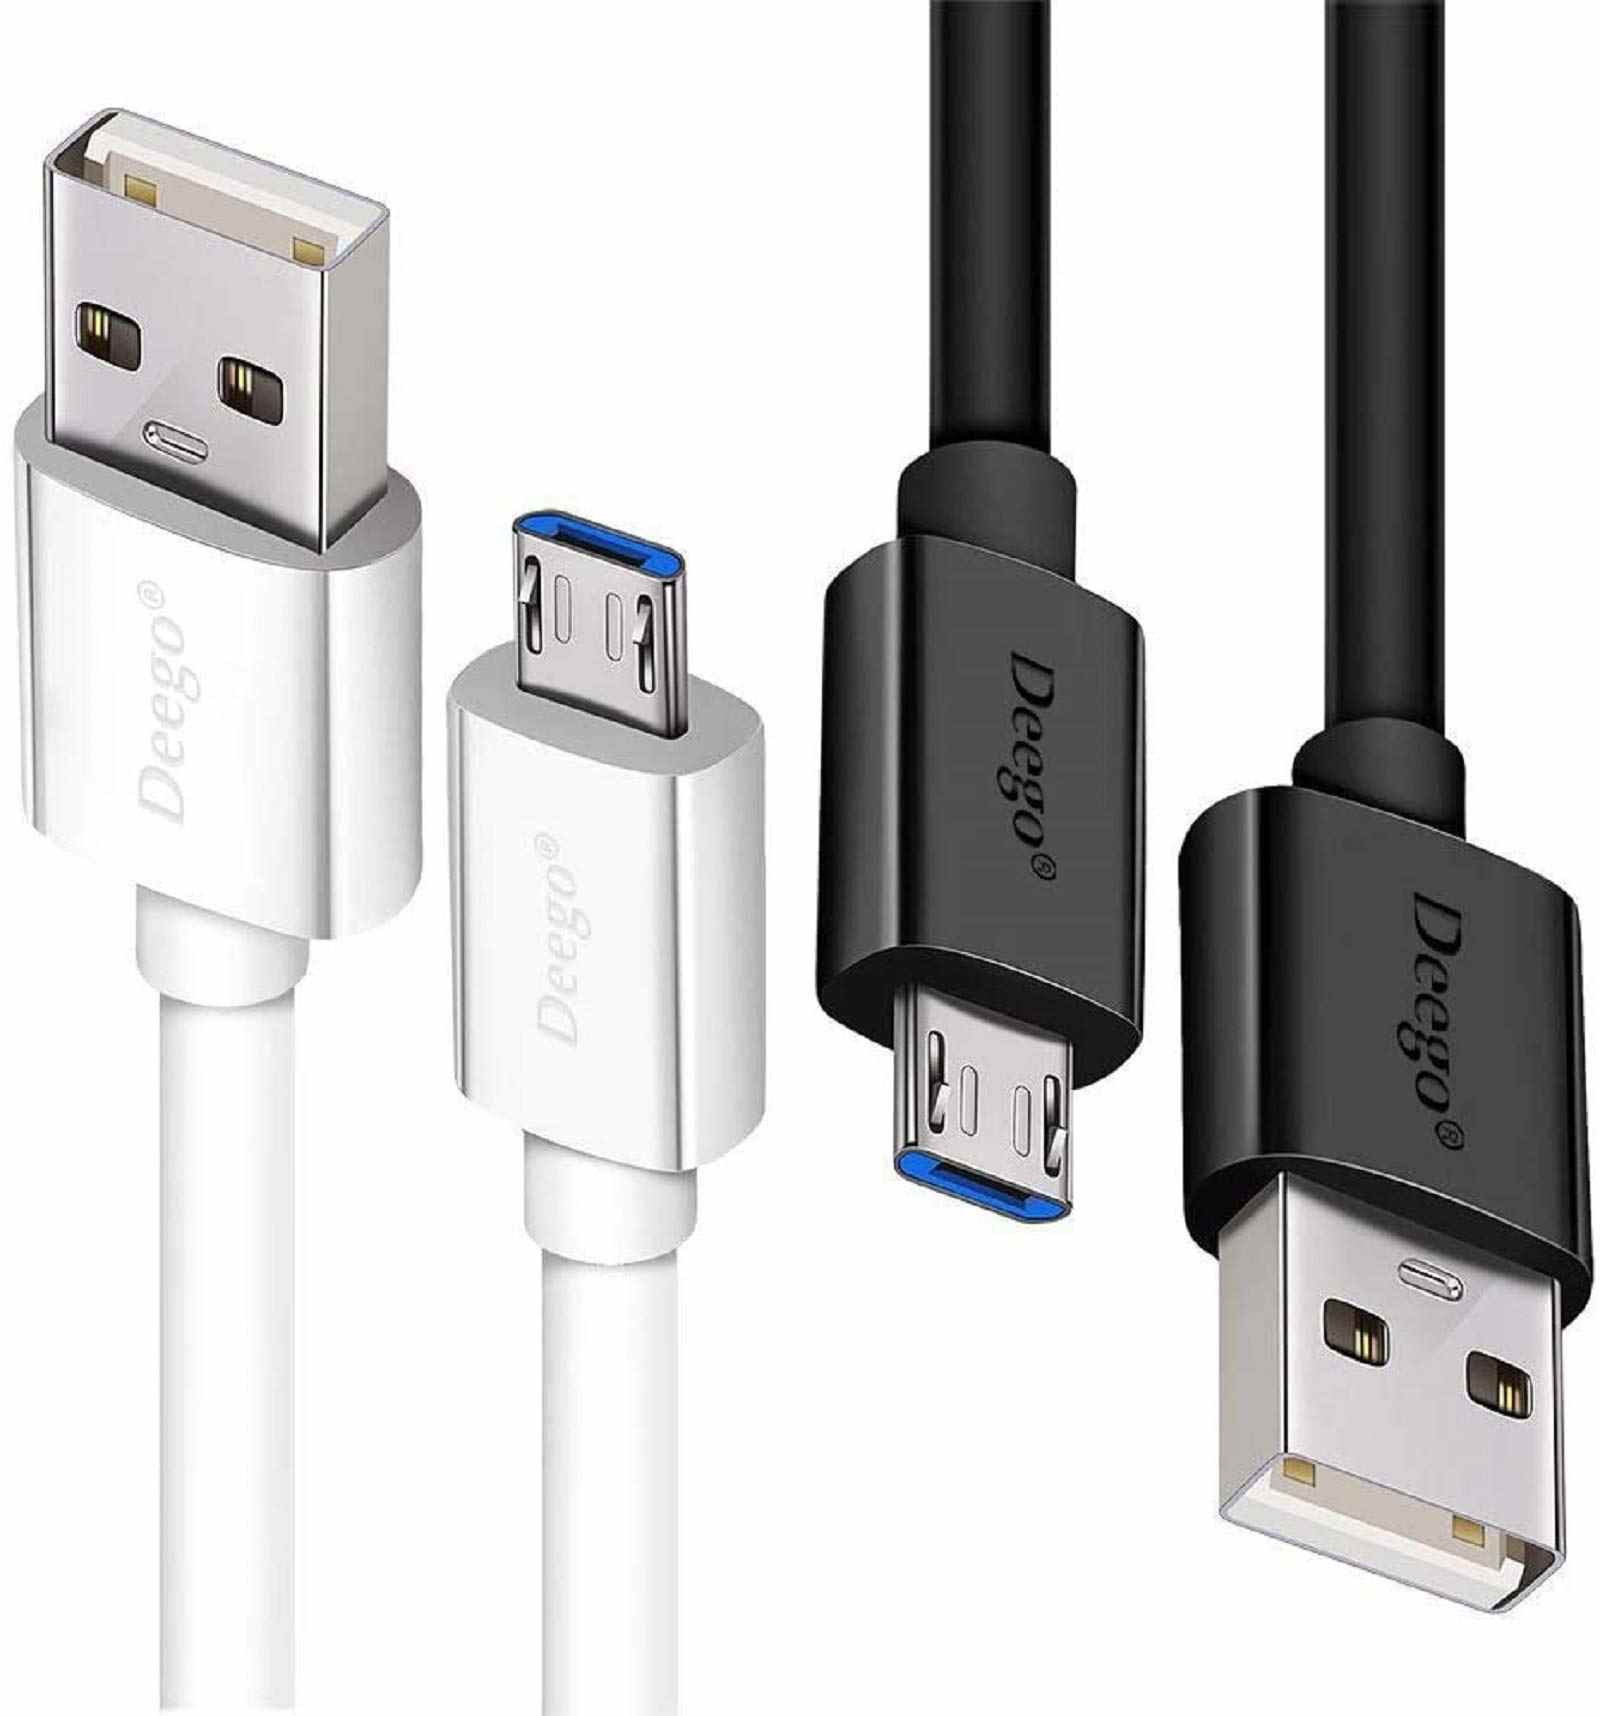 Government Issues Quality Standards for USB Type-C Chargers